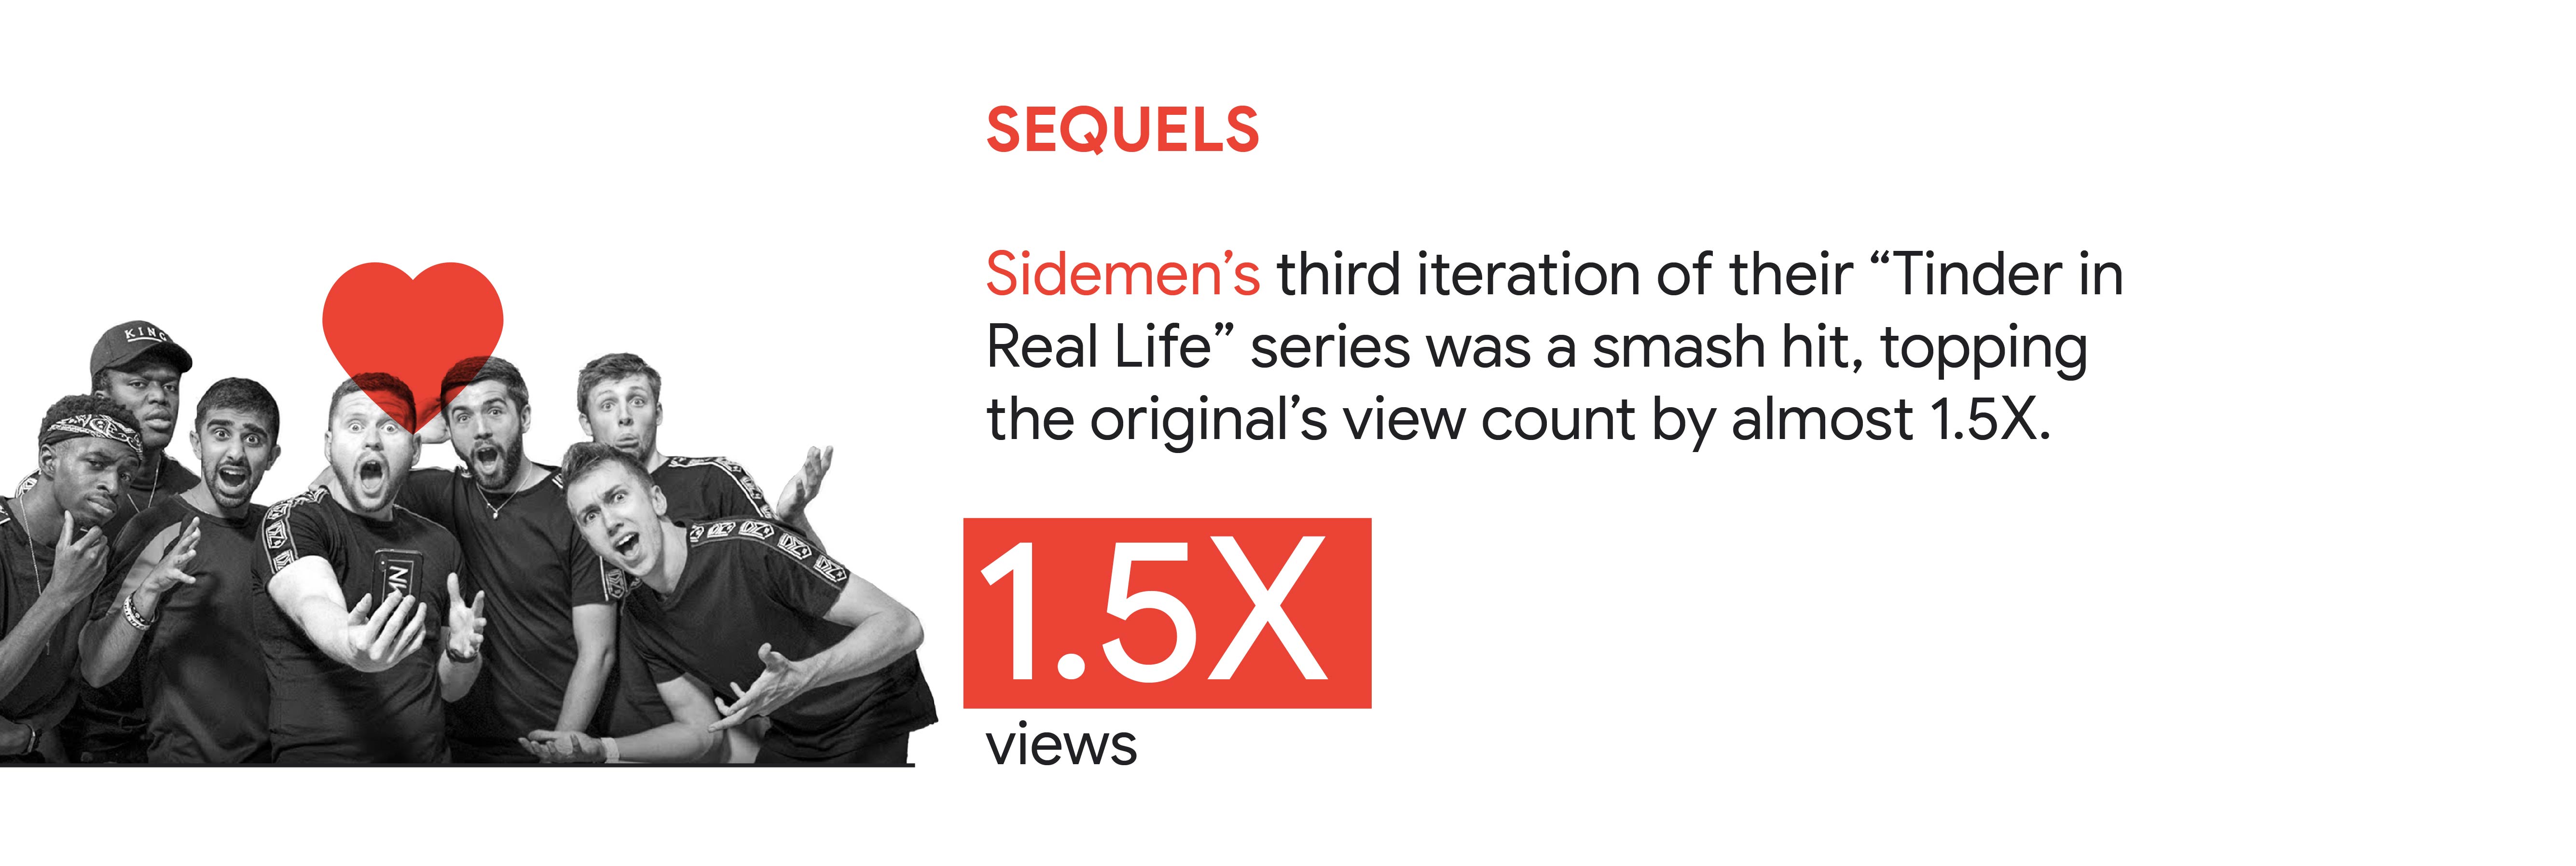 YouTube trend 1: Sequels. In APAC, Sidemen’s third iteration of their “Tinder in Real Life” series was a smash hit, topping the original view count by almost 1.5X.